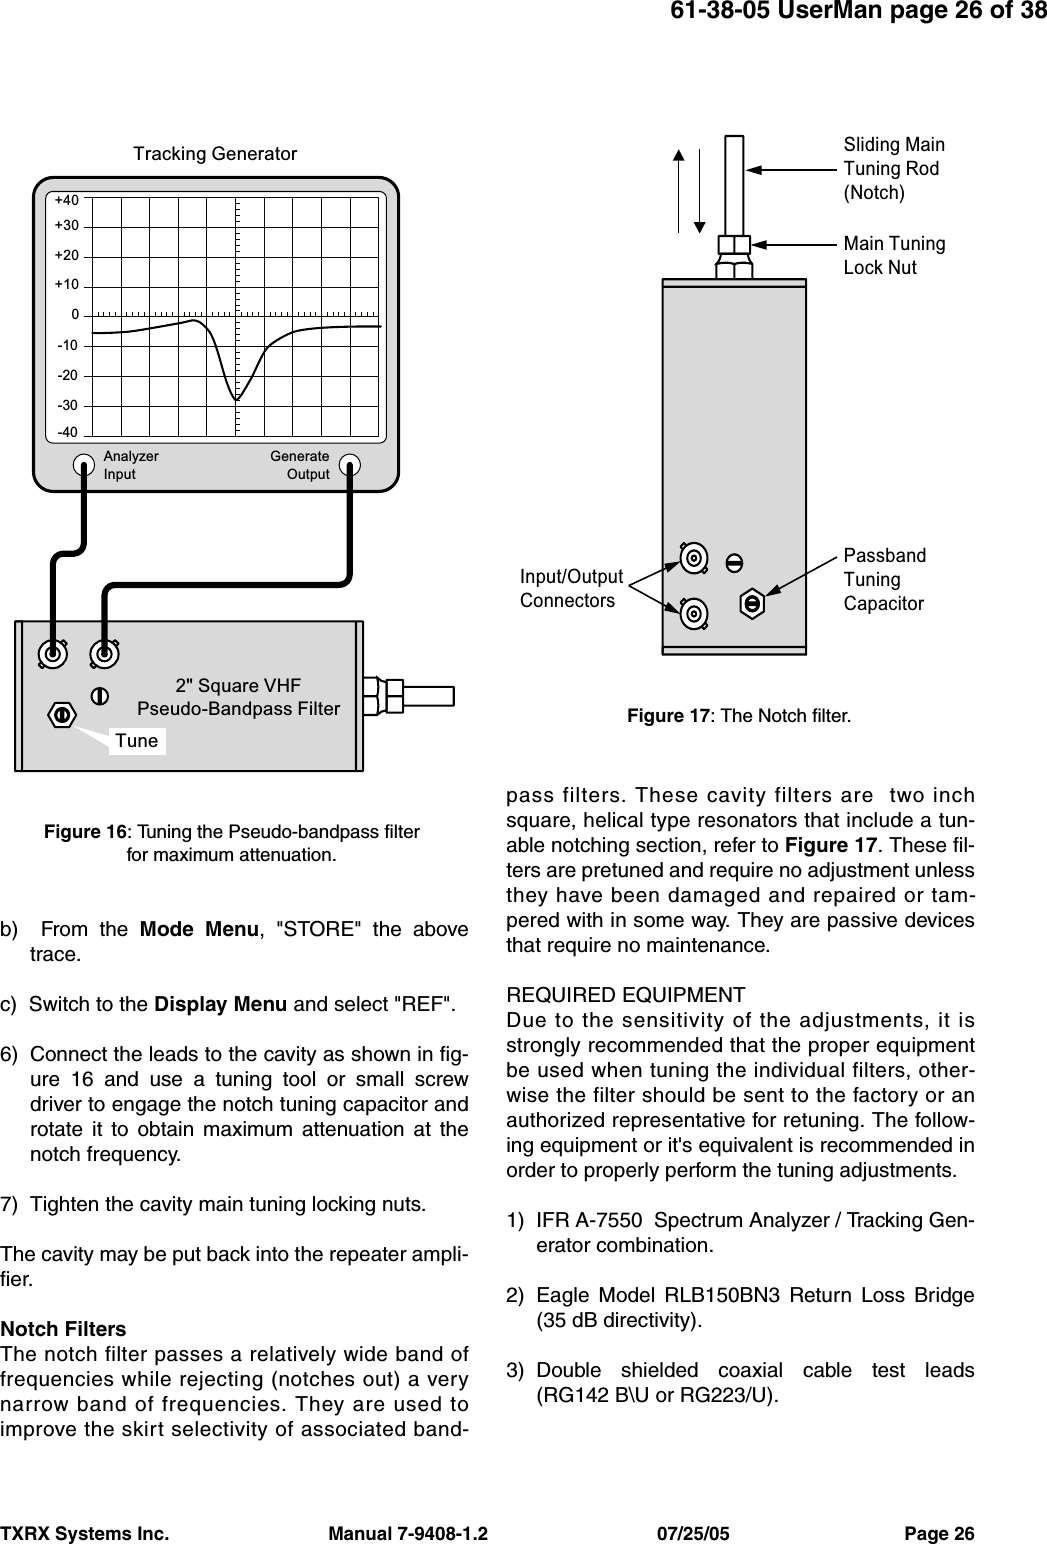 61-38-05 UserMan page 26 of 38TXRX Systems Inc.                               Manual 7-9408-1.2                                 07/25/05                                  Page 26b)  From the Mode Menu, &quot;STORE&quot; the abovetrace.c)  Switch to the Display Menu and select &quot;REF&quot;.6) Connect the leads to the cavity as shown in fig-ure 16 and use a tuning tool or small screwdriver to engage the notch tuning capacitor androtate it to obtain maximum attenuation at thenotch frequency. 7) Tighten the cavity main tuning locking nuts.The cavity may be put back into the repeater ampli-fier.Notch FiltersThe notch filter passes a relatively wide band offrequencies while rejecting (notches out) a verynarrow band of frequencies. They are used toimprove the skirt selectivity of associated band-pass filters. These cavity filters are  two inchsquare, helical type resonators that include a tun-able notching section, refer to Figure 17. These fil-ters are pretuned and require no adjustment unlessthey have been damaged and repaired or tam-pered with in some way. They are passive devicesthat require no maintenance. REQUIRED EQUIPMENTDue to the sensitivity of the adjustments, it isstrongly recommended that the proper equipmentbe used when tuning the individual filters, other-wise the filter should be sent to the factory or anauthorized representative for retuning. The follow-ing equipment or it&apos;s equivalent is recommended inorder to properly perform the tuning adjustments.1) IFR A-7550  Spectrum Analyzer / Tracking Gen-erator combination.2) Eagle Model RLB150BN3 Return Loss Bridge(35 dB directivity).3) Double shielded coaxial cable test leads(RG142 B\U or RG223/U).AnalyzerInputGenerateOutput+30+40+20+100-10-20-30-402&quot; Square VHFPseudo-Bandpass FilterTracking GeneratorTuneFigure 16: Tuning the Pseudo-bandpass filter for maximum attenuation.Sliding MainTuning Rod(Notch)Main TuningLock NutPassbandTuningCapacitorInput/OutputConnectorsFigure 17: The Notch filter.